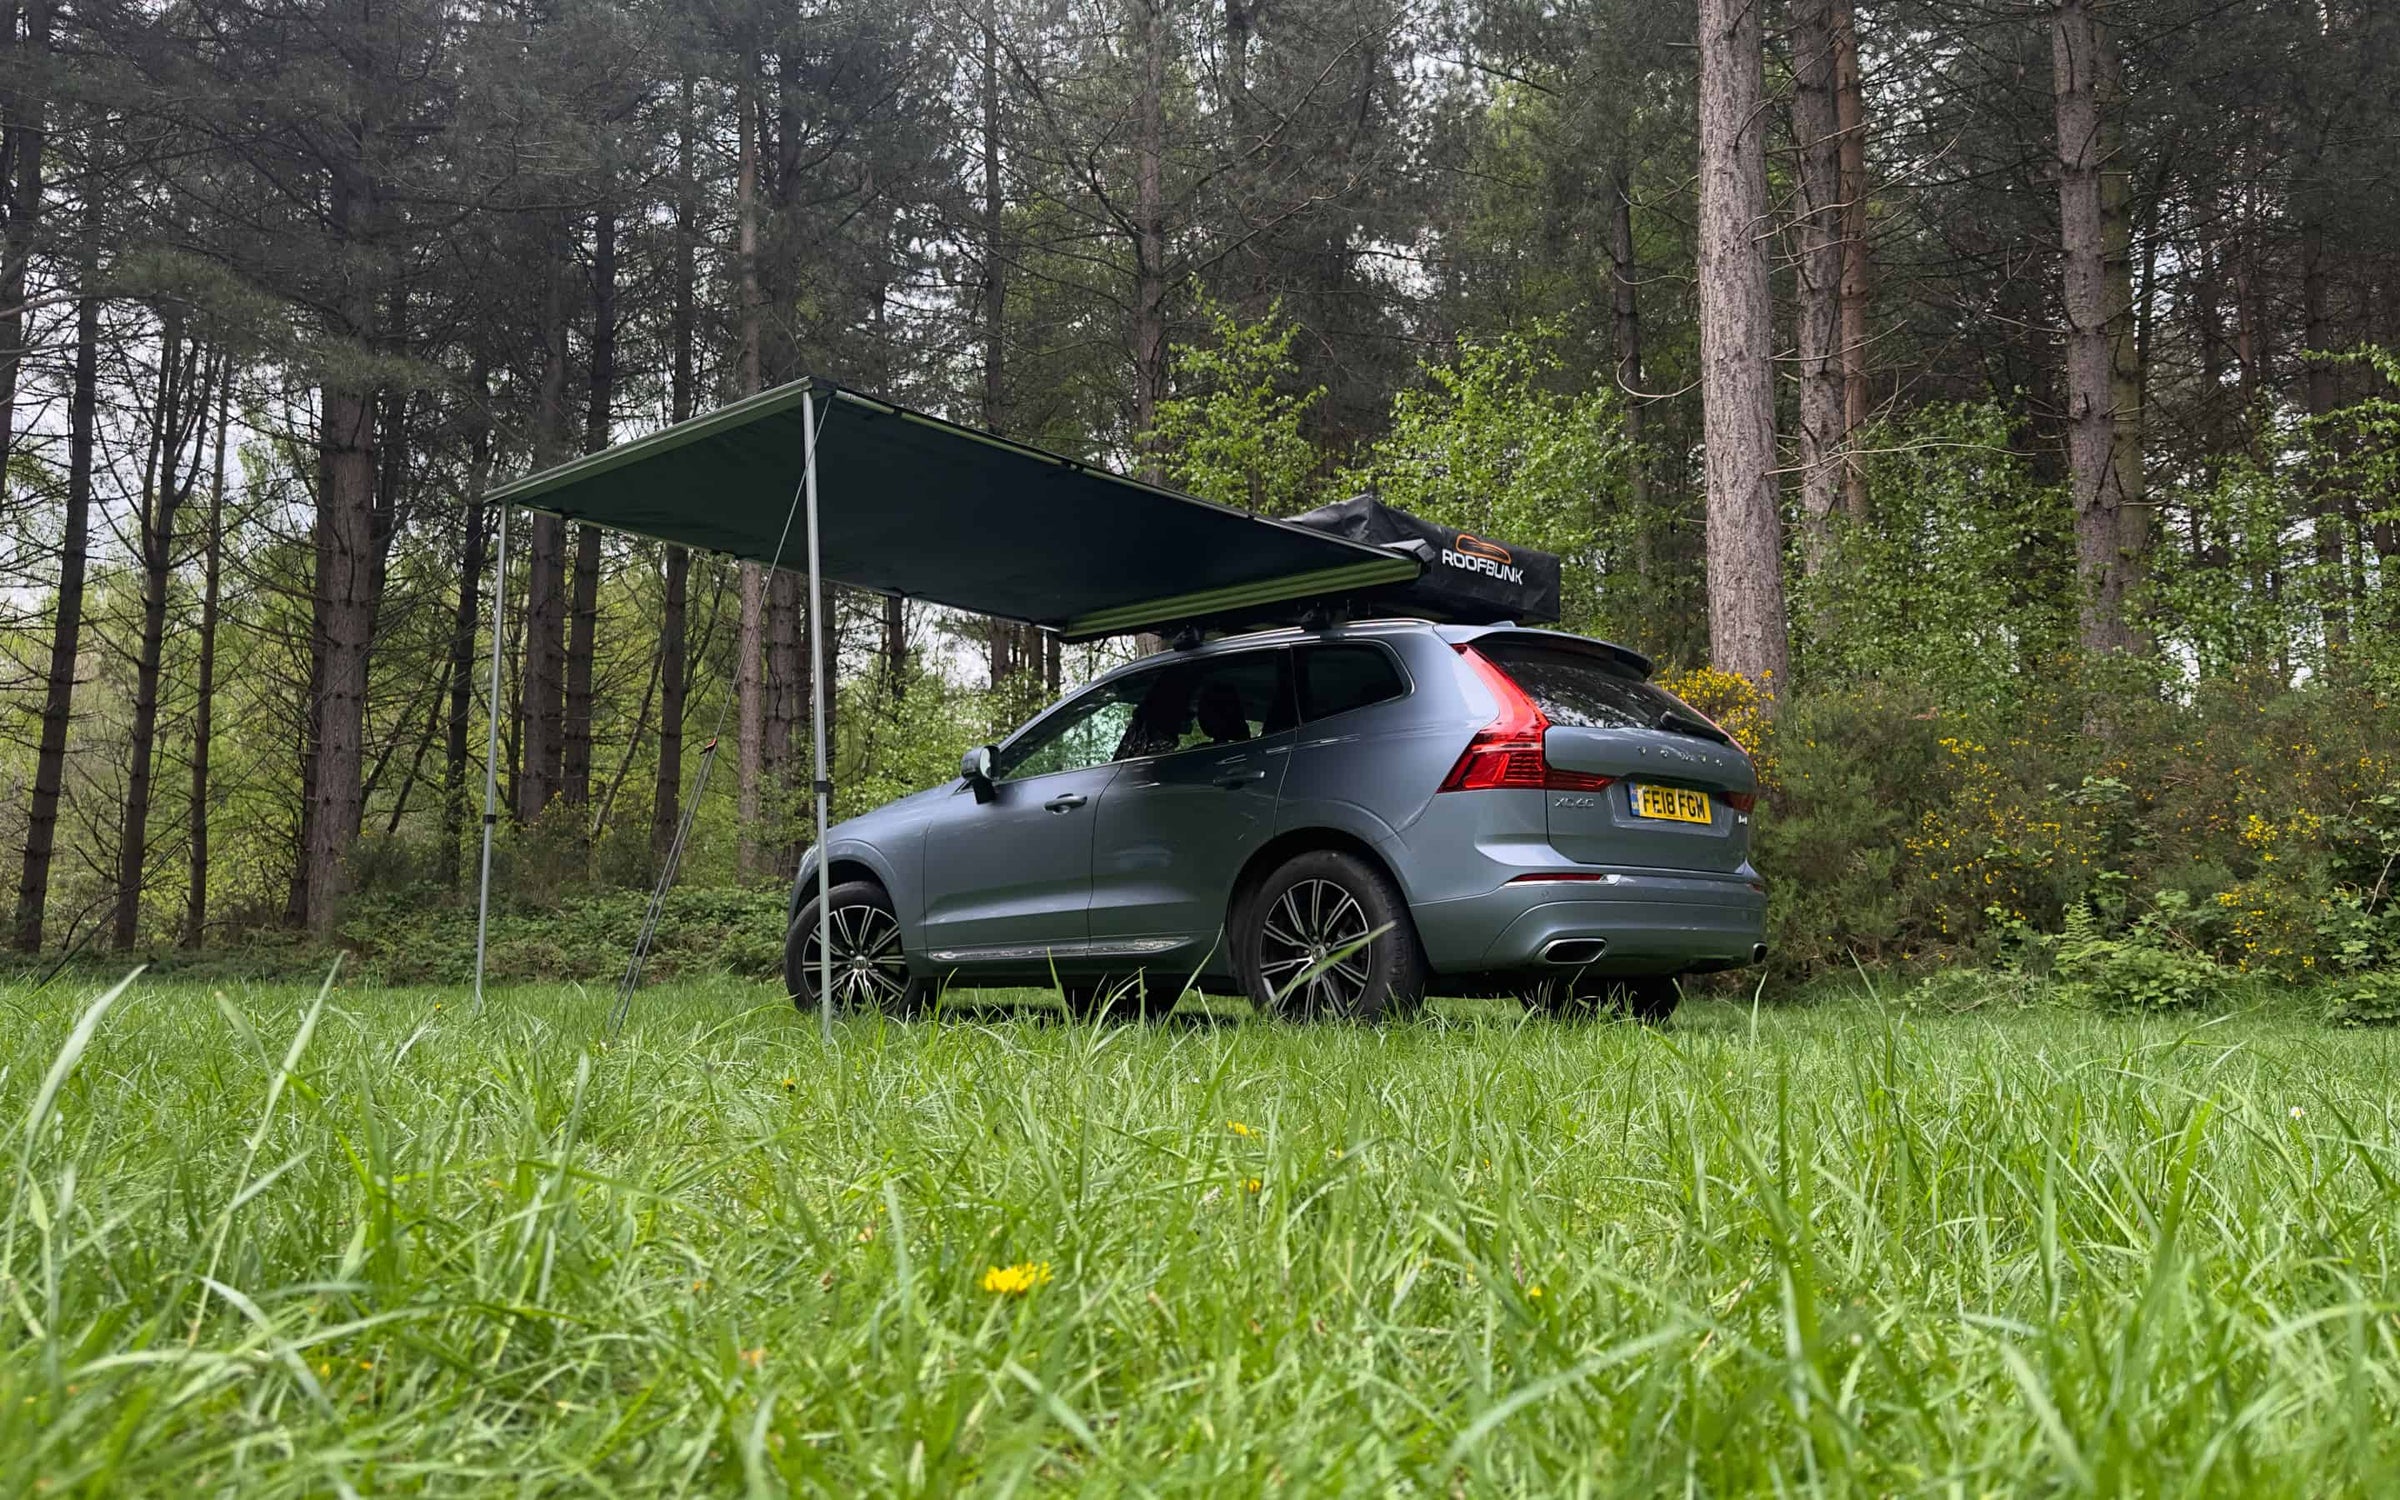 RoofBunk Roof Tent Accessories